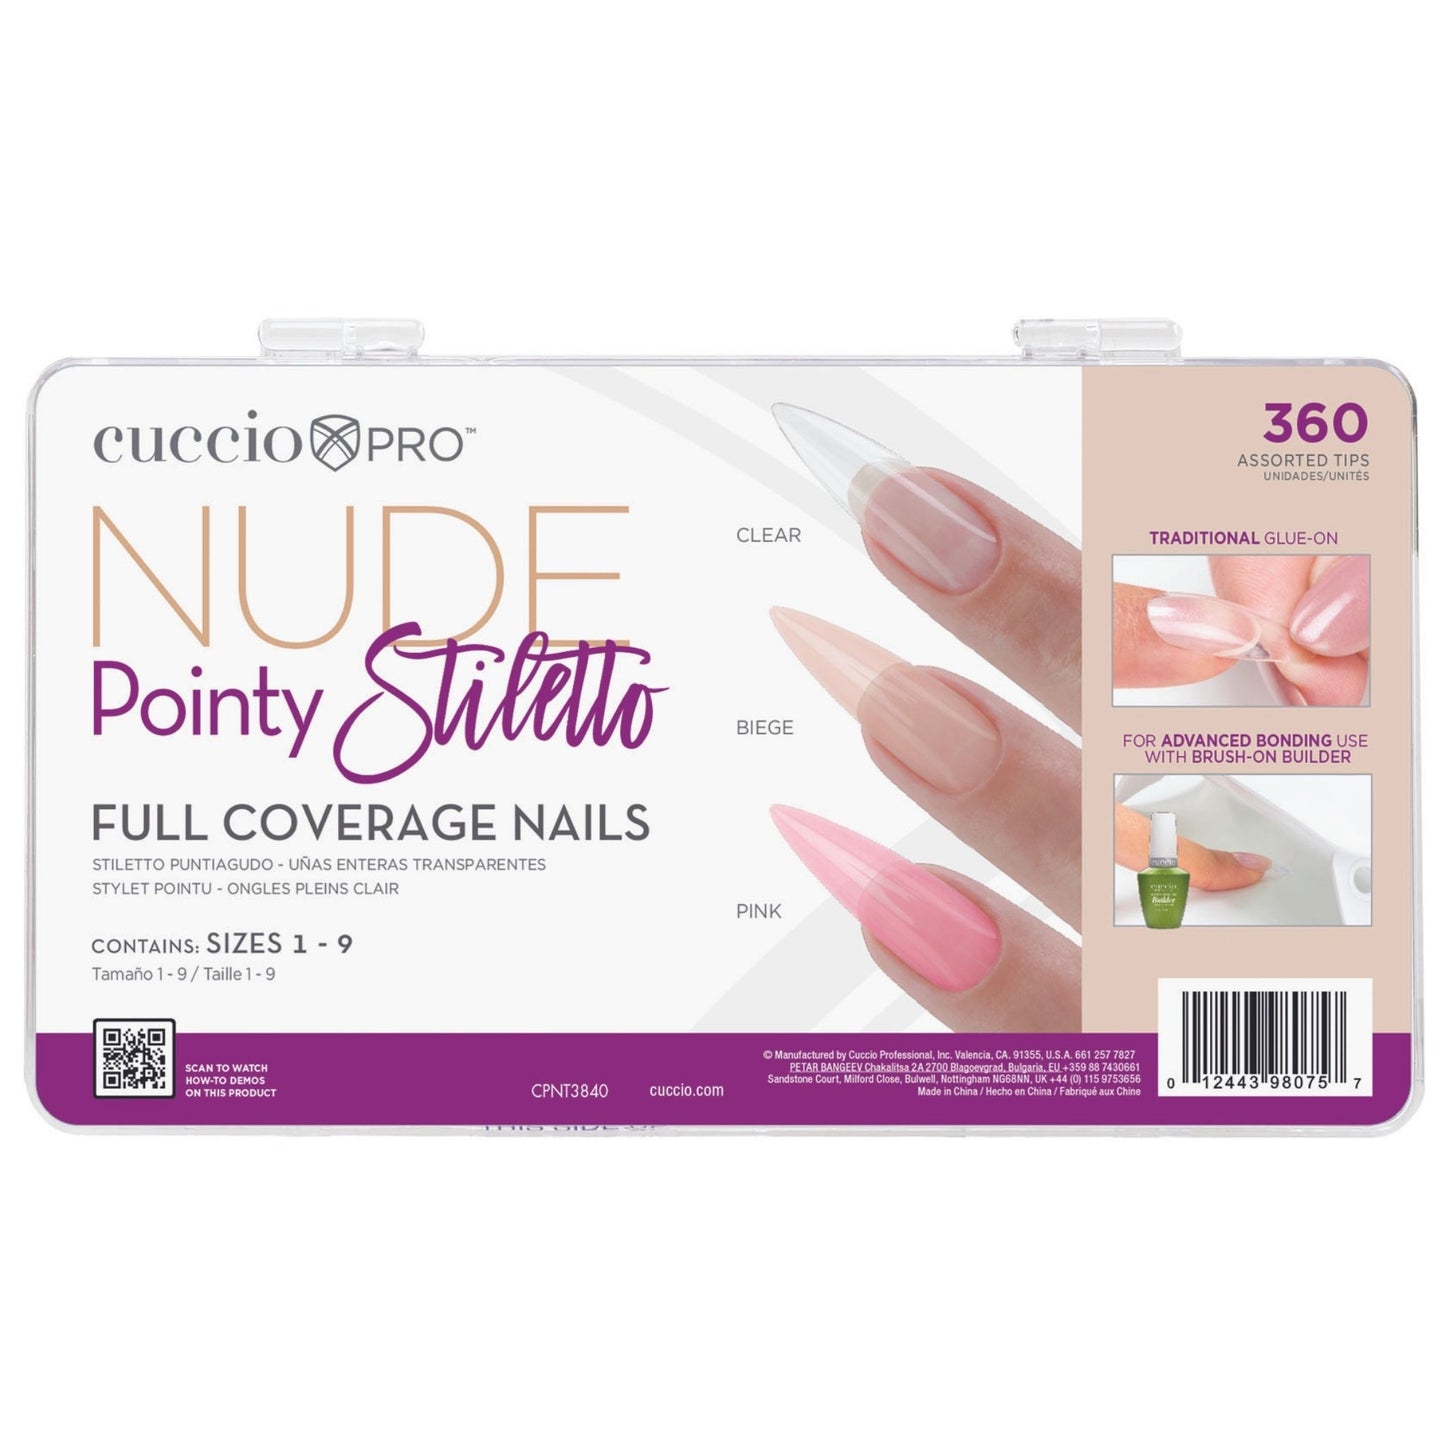 Full Coverage Nail Tips - Pointy Stiletto - 360 Count